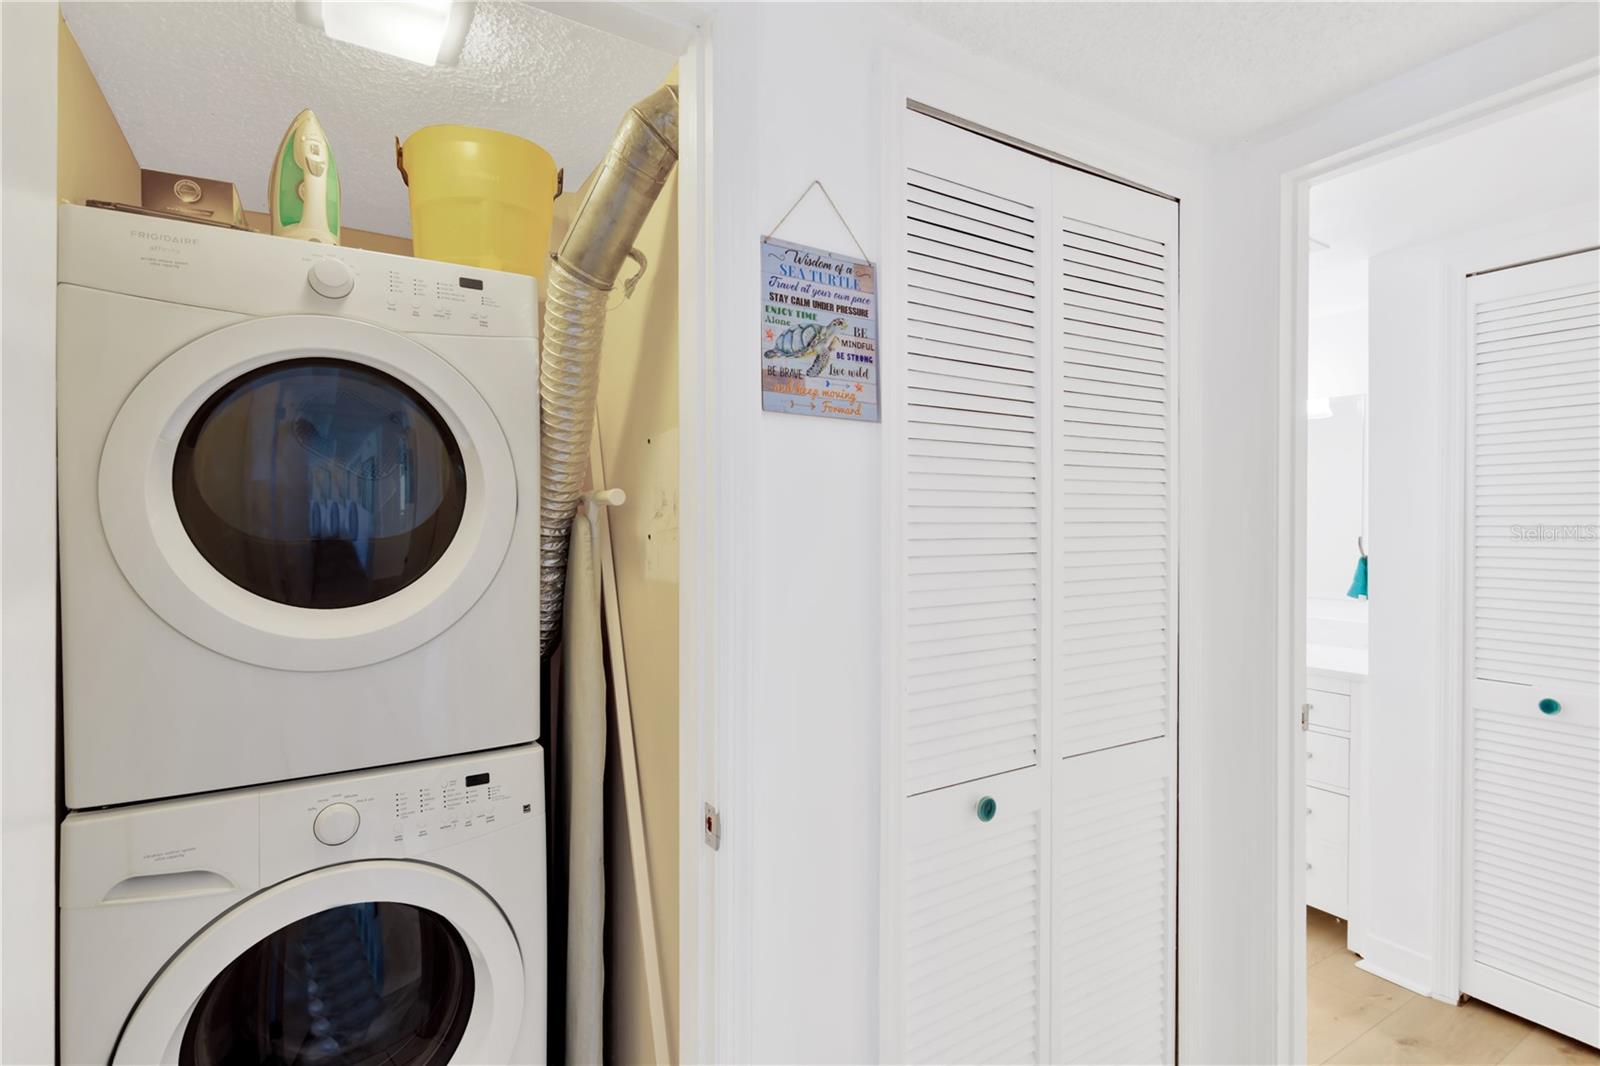 Laundry Closet - Washer & Dryer Included.